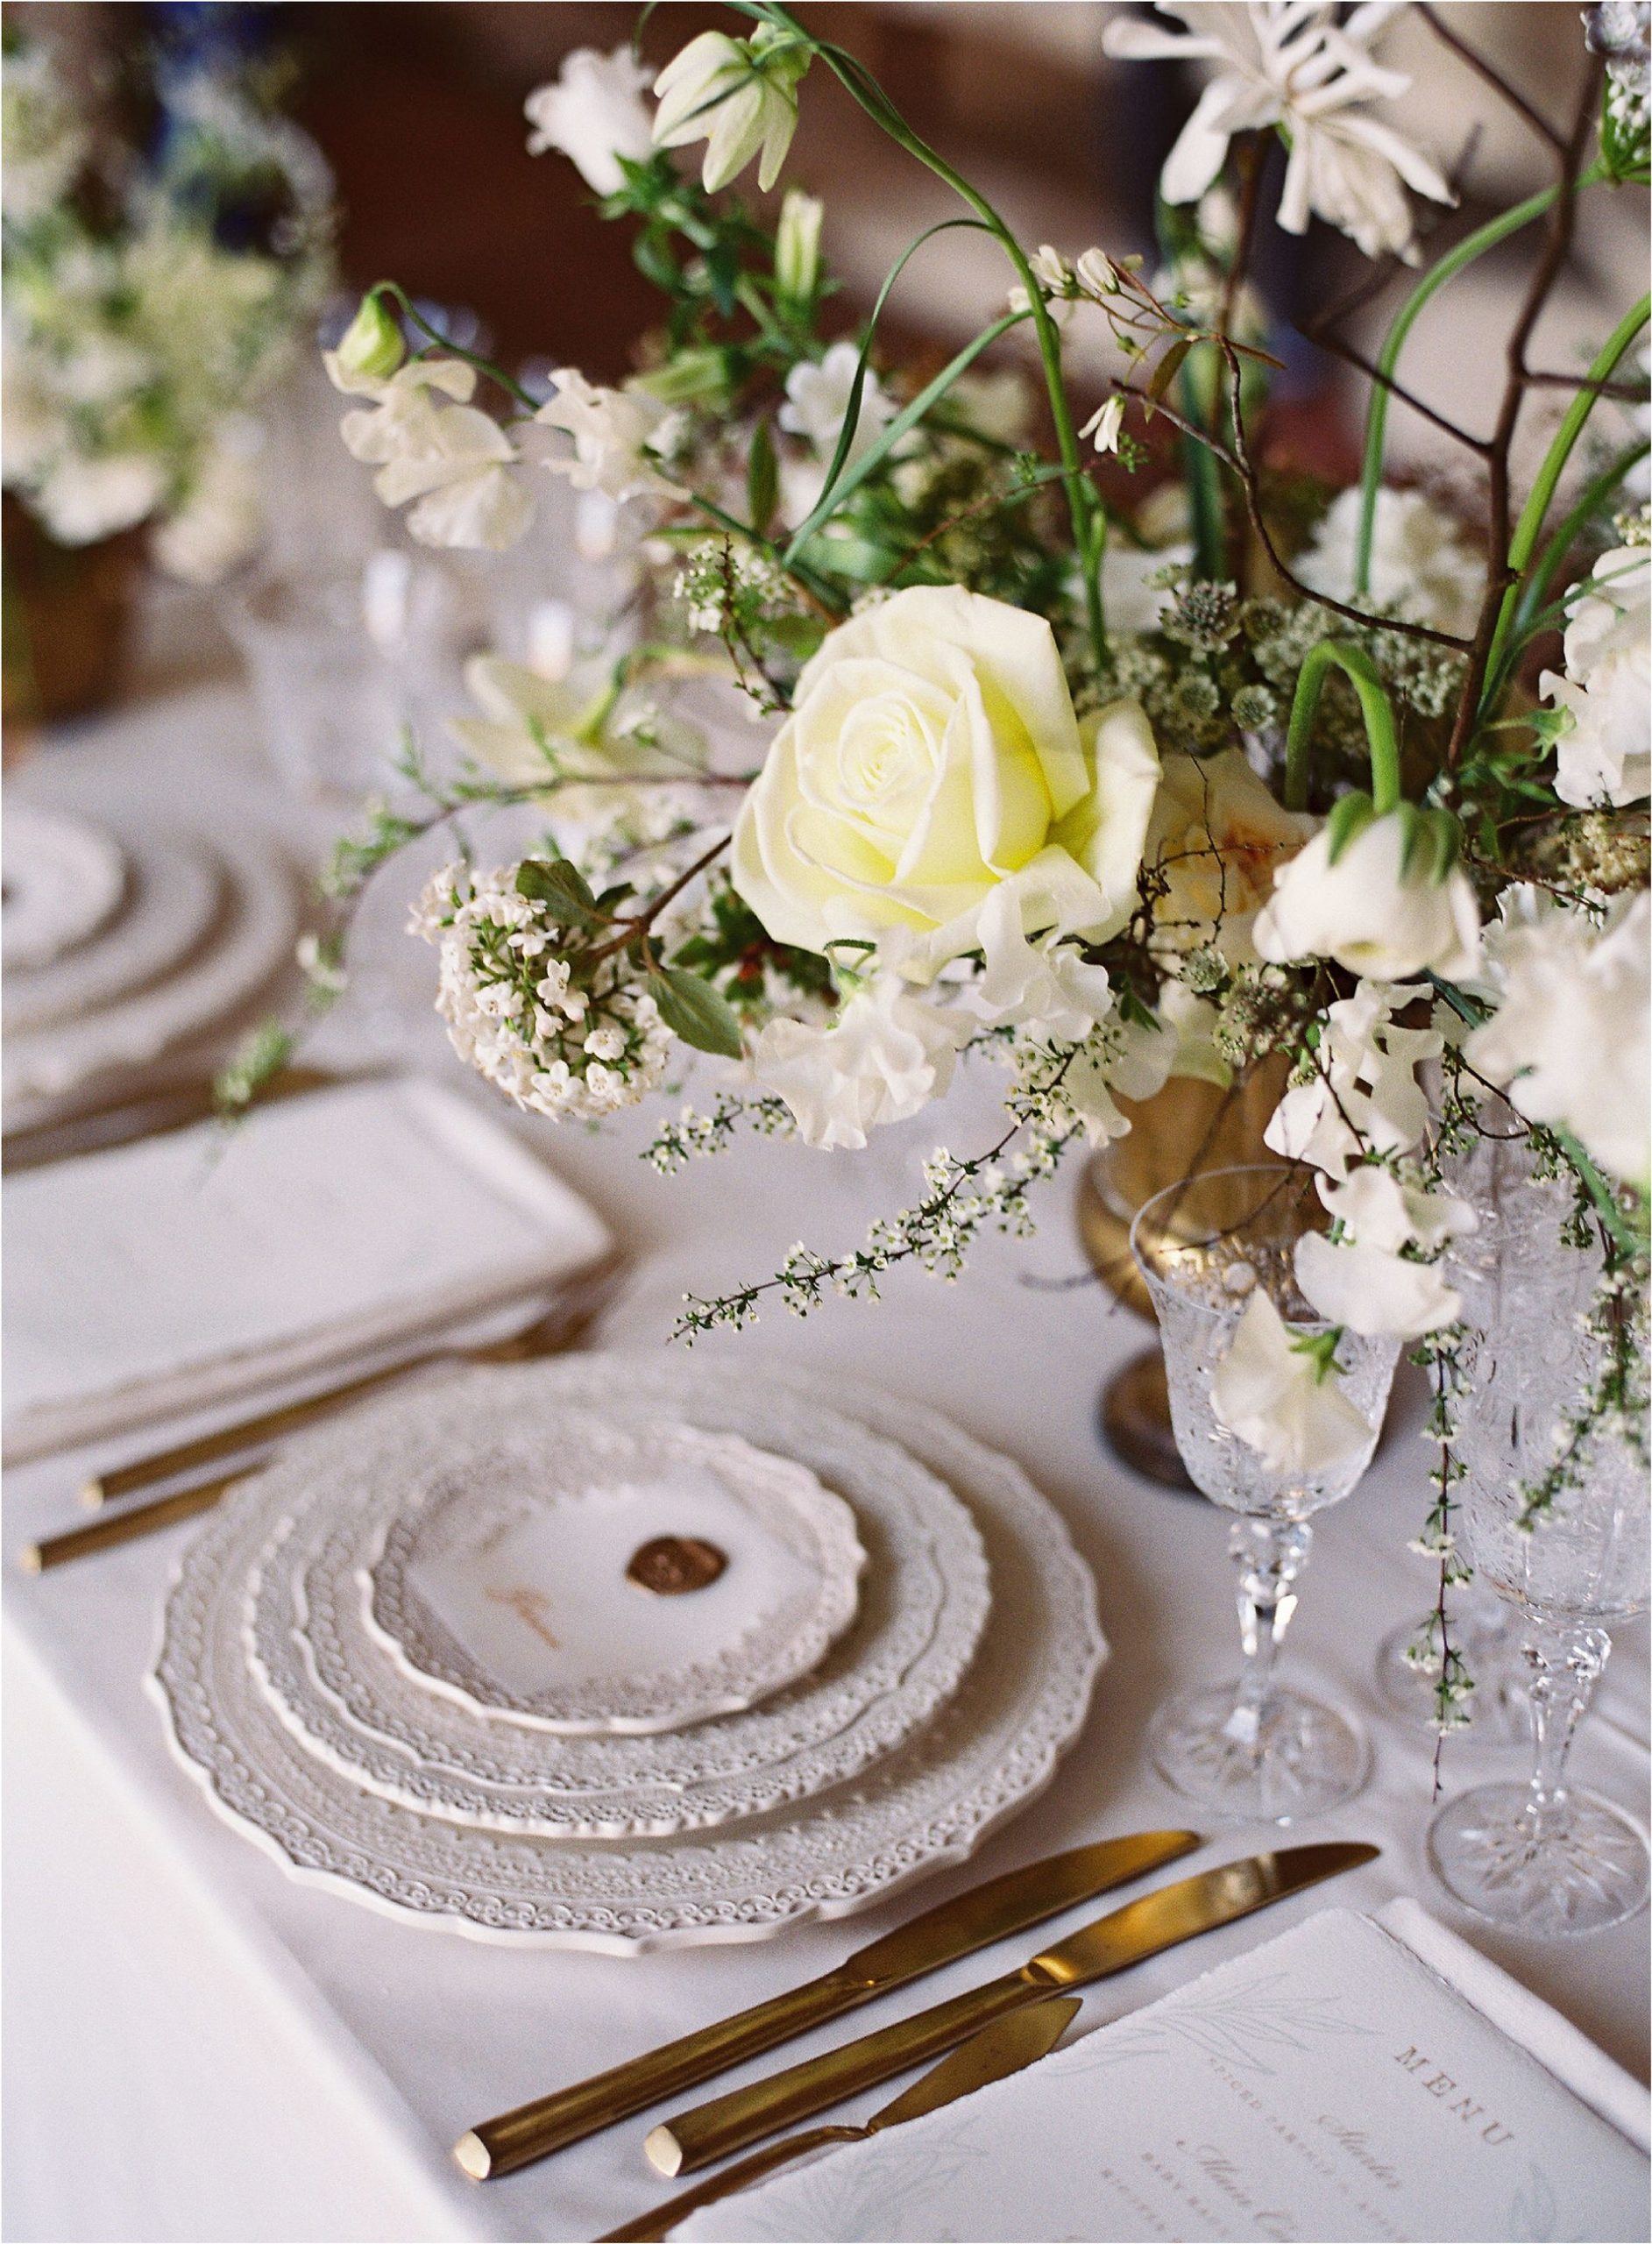 table setting for wedding breakfast to celebrate your wedding date